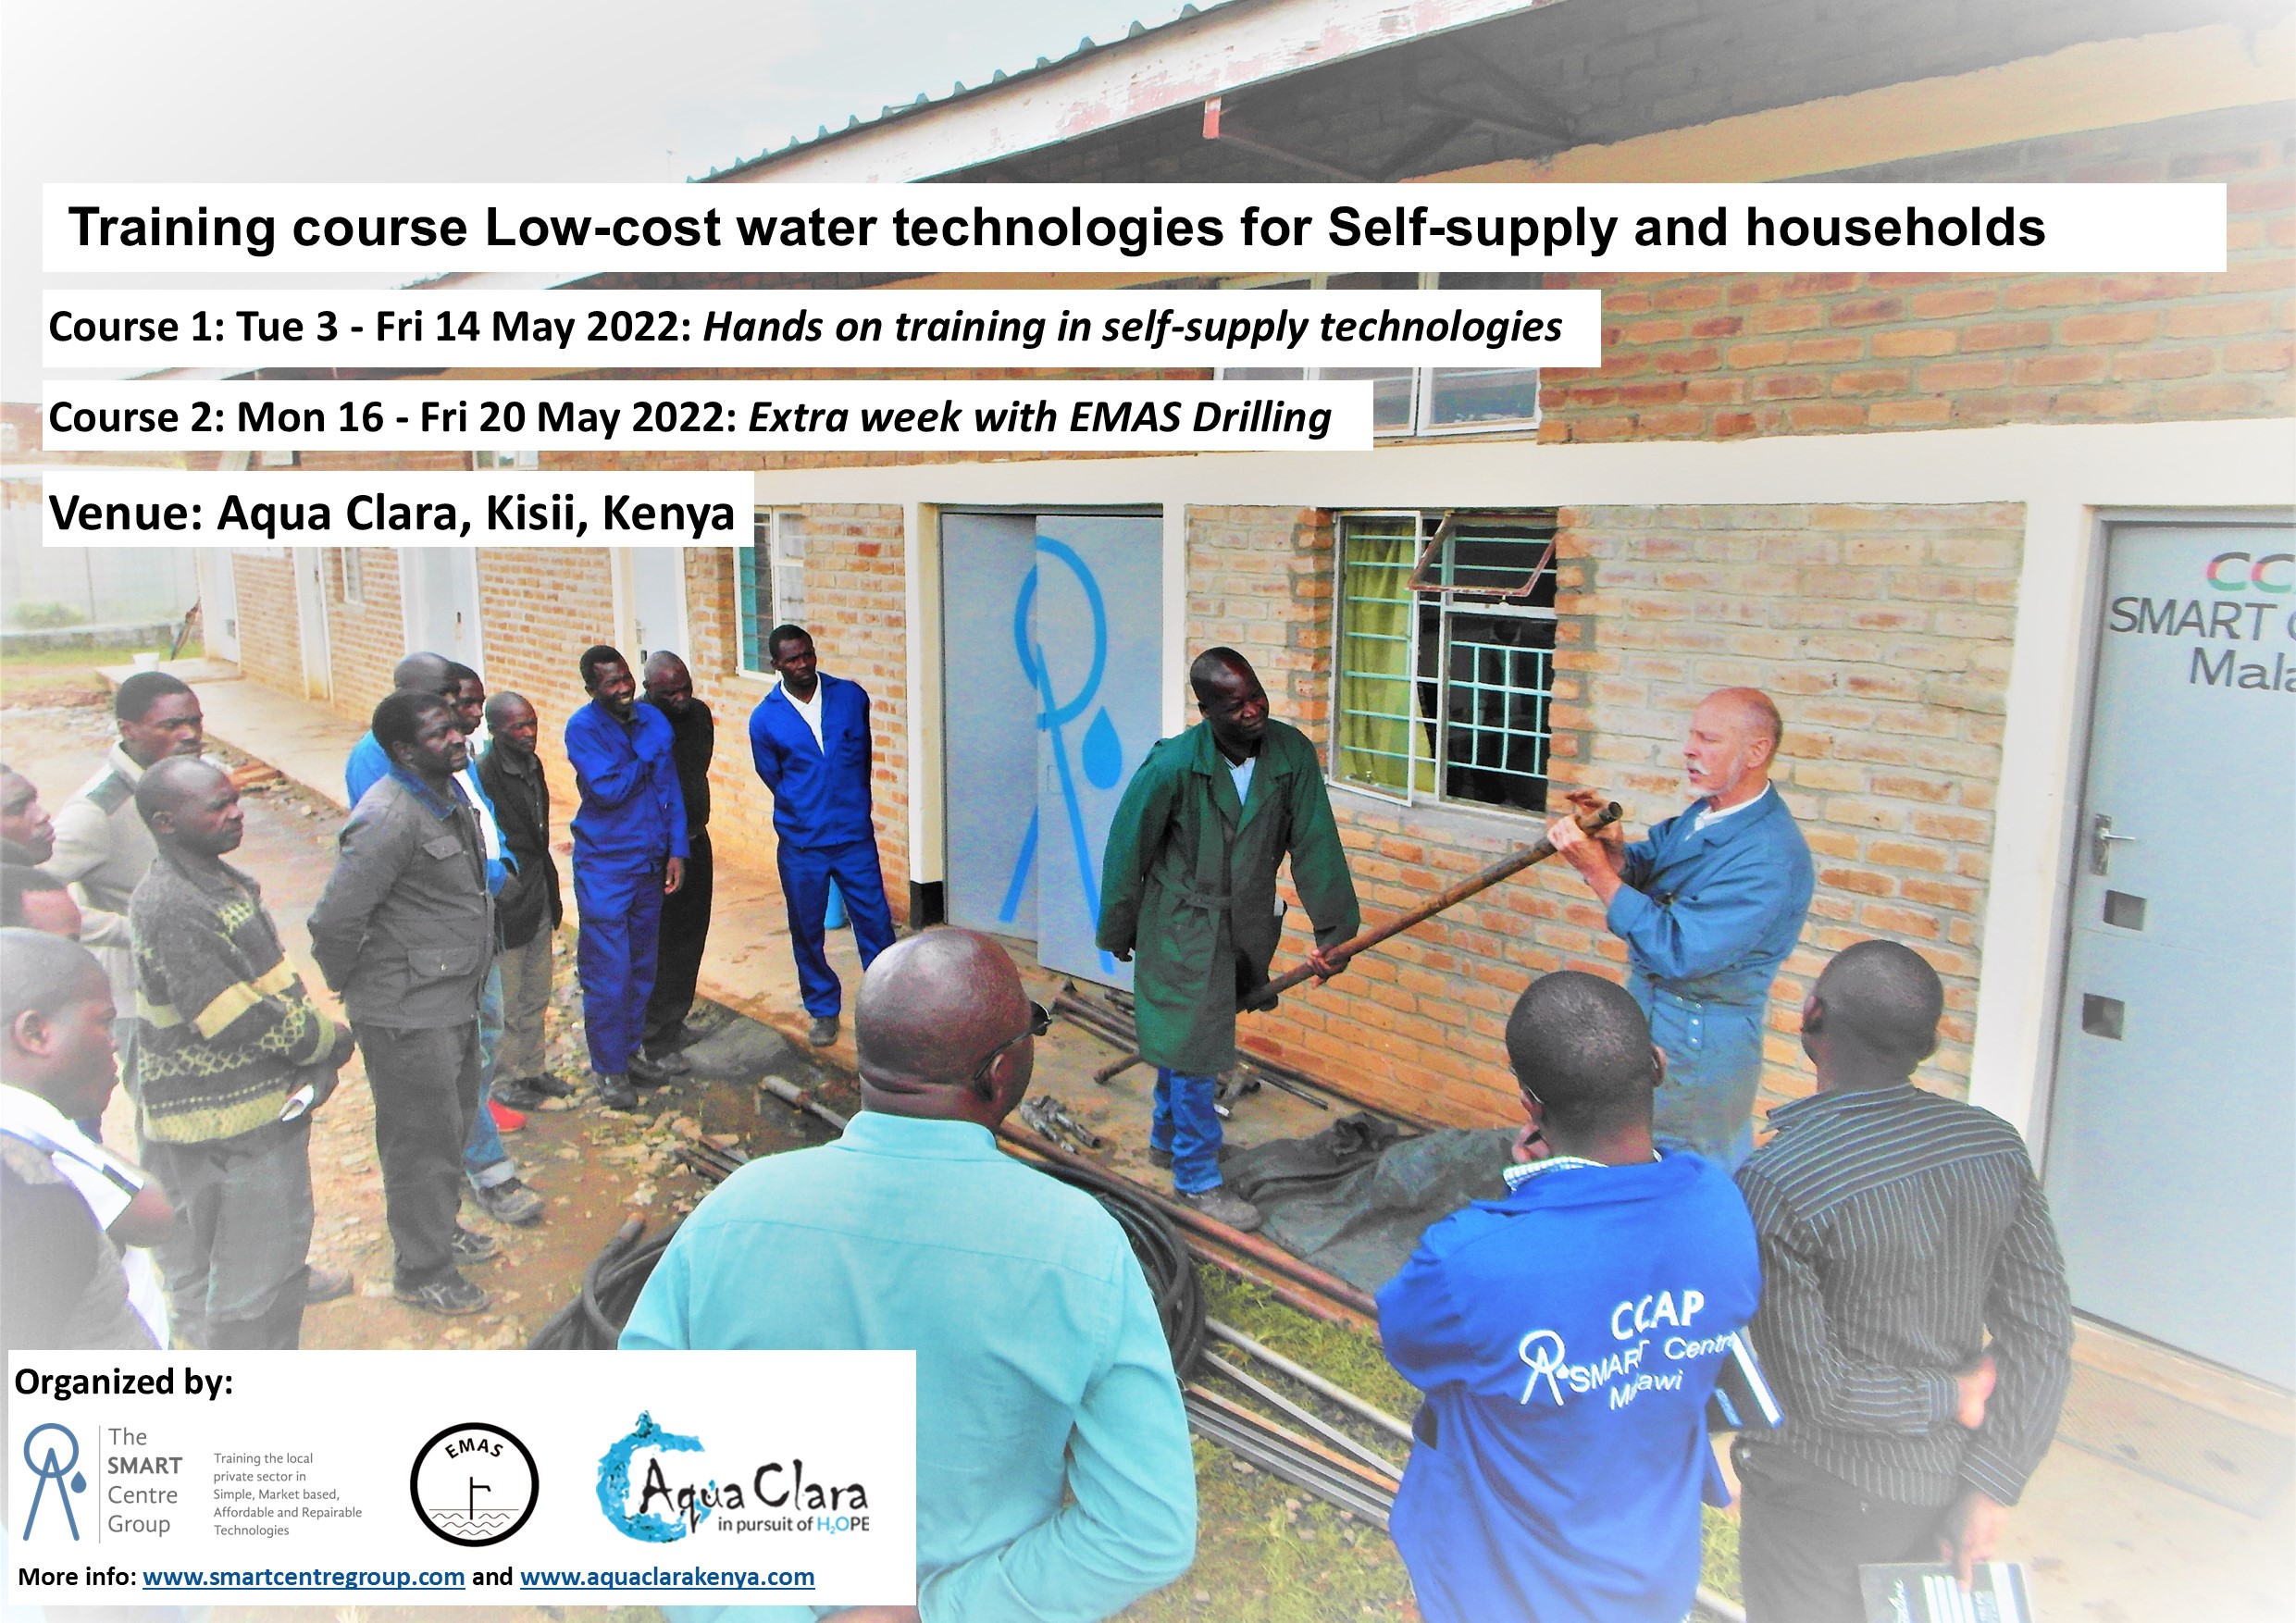 Training course in Kenya in low cost water technologies for Self-supply /households